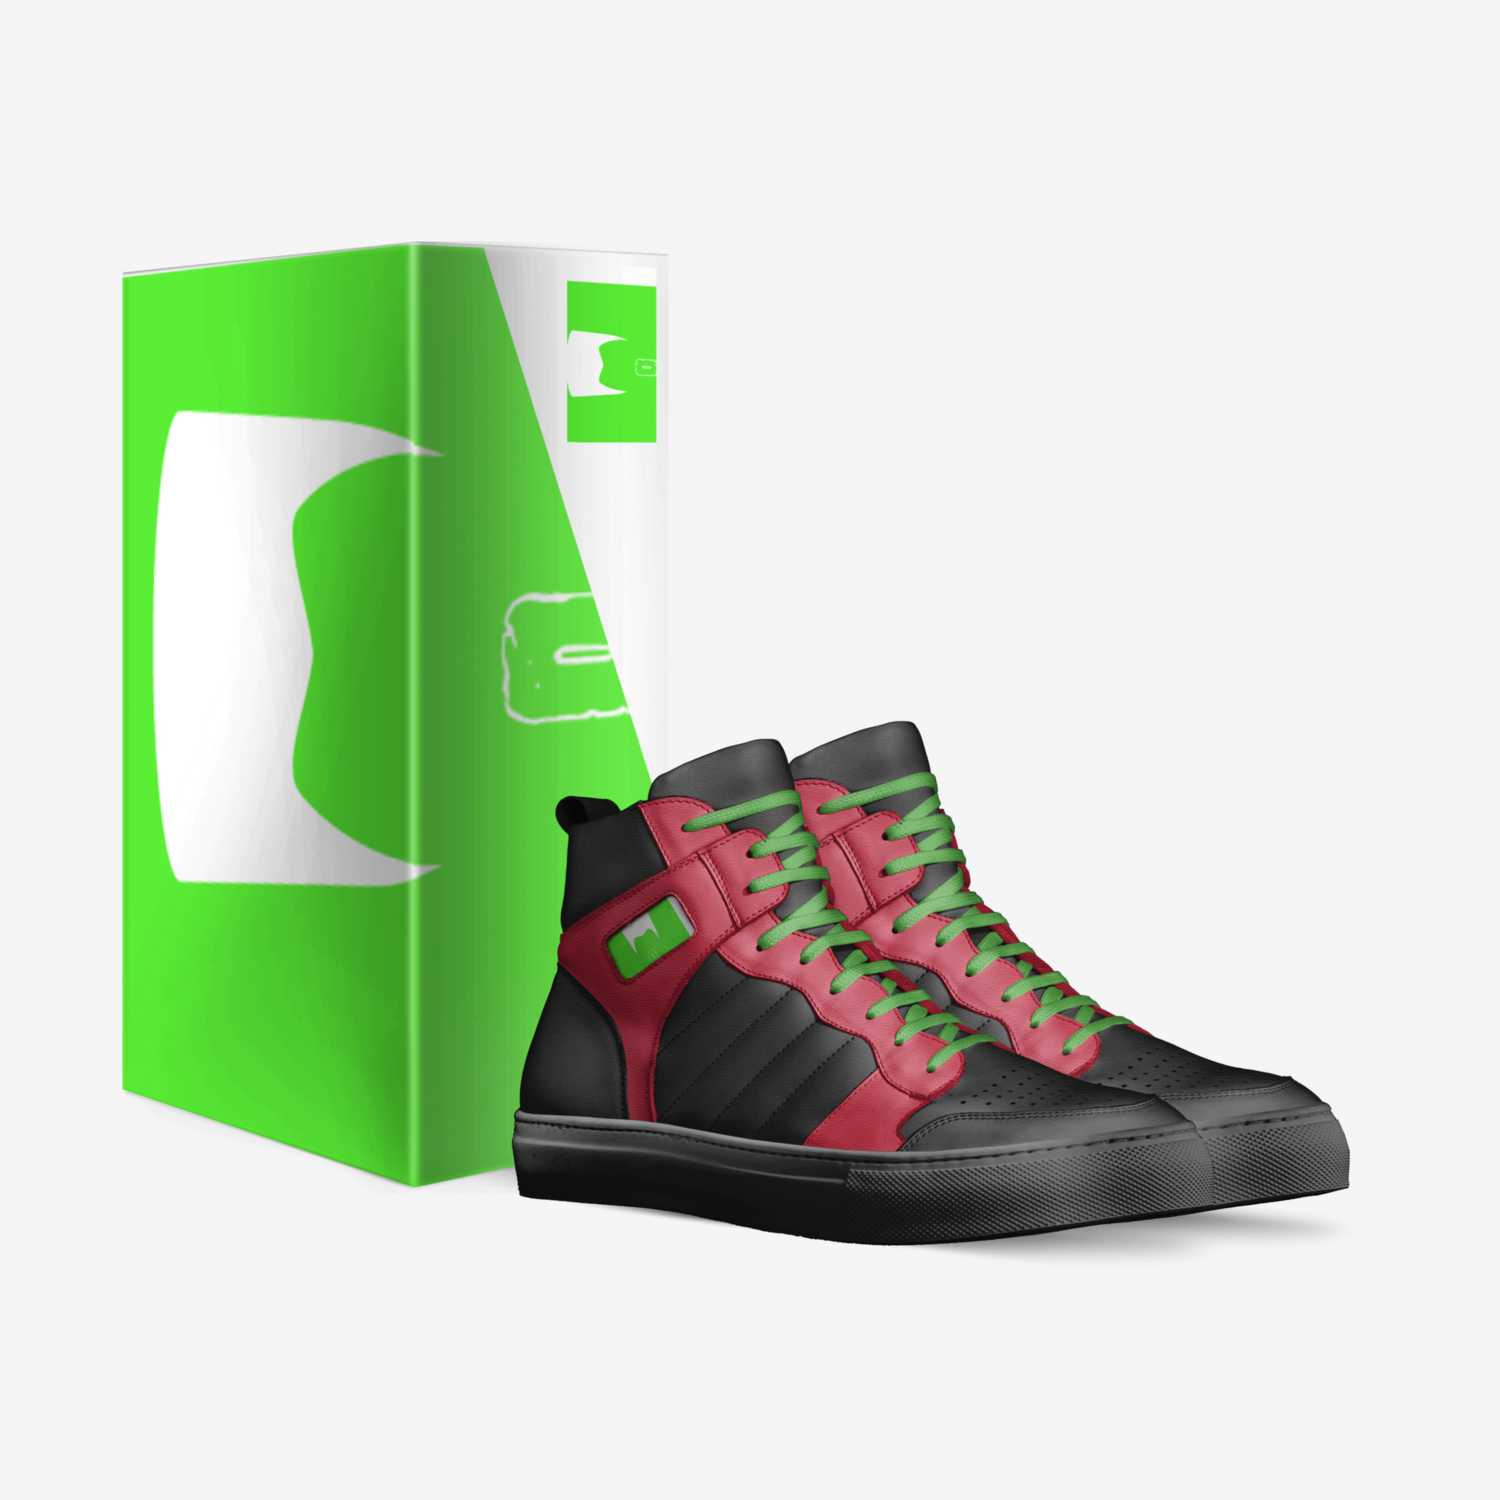 Christmasad custom made in Italy shoes by Erick Oporto | Box view